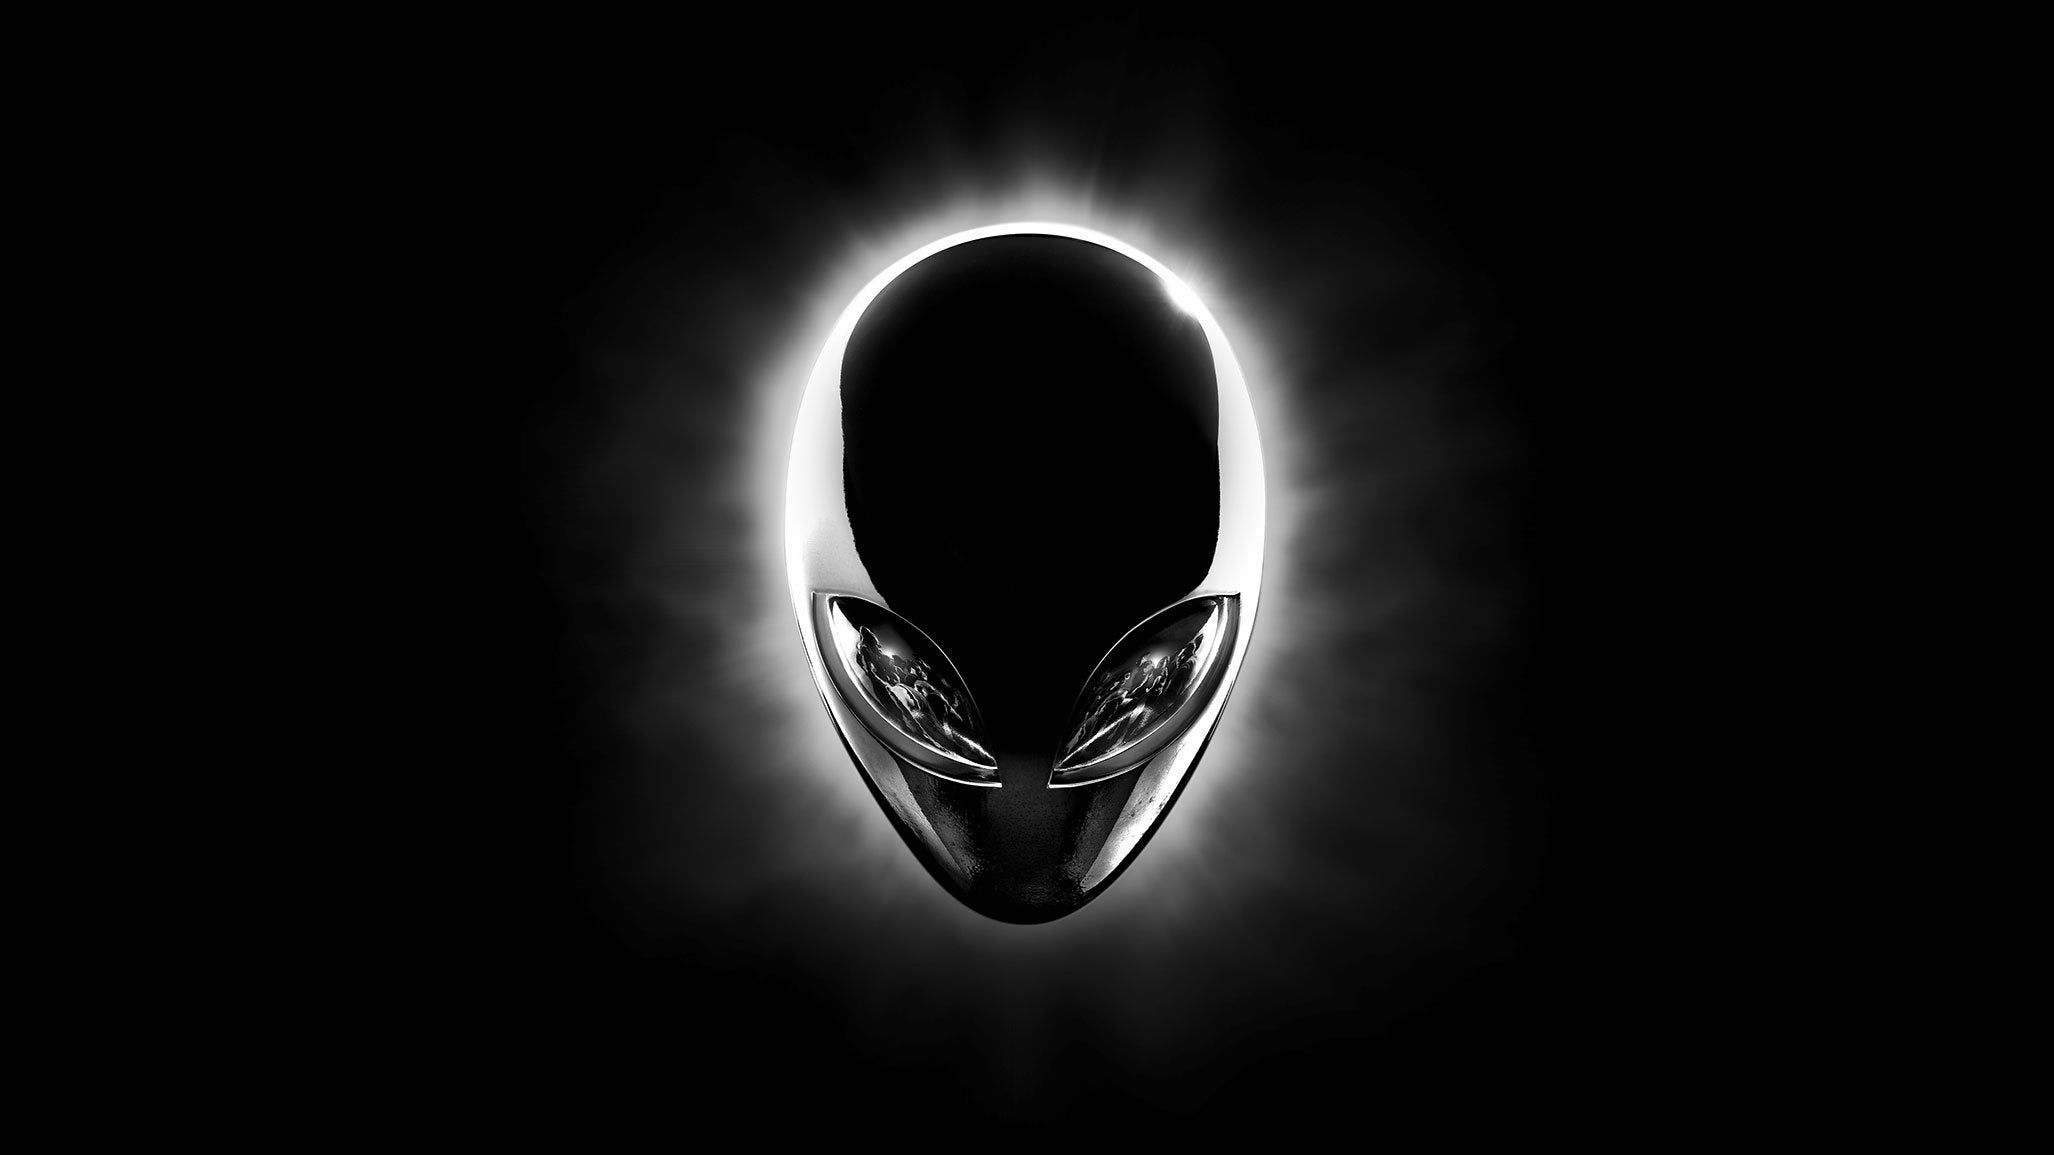 Alienware Chrome Wallpapers